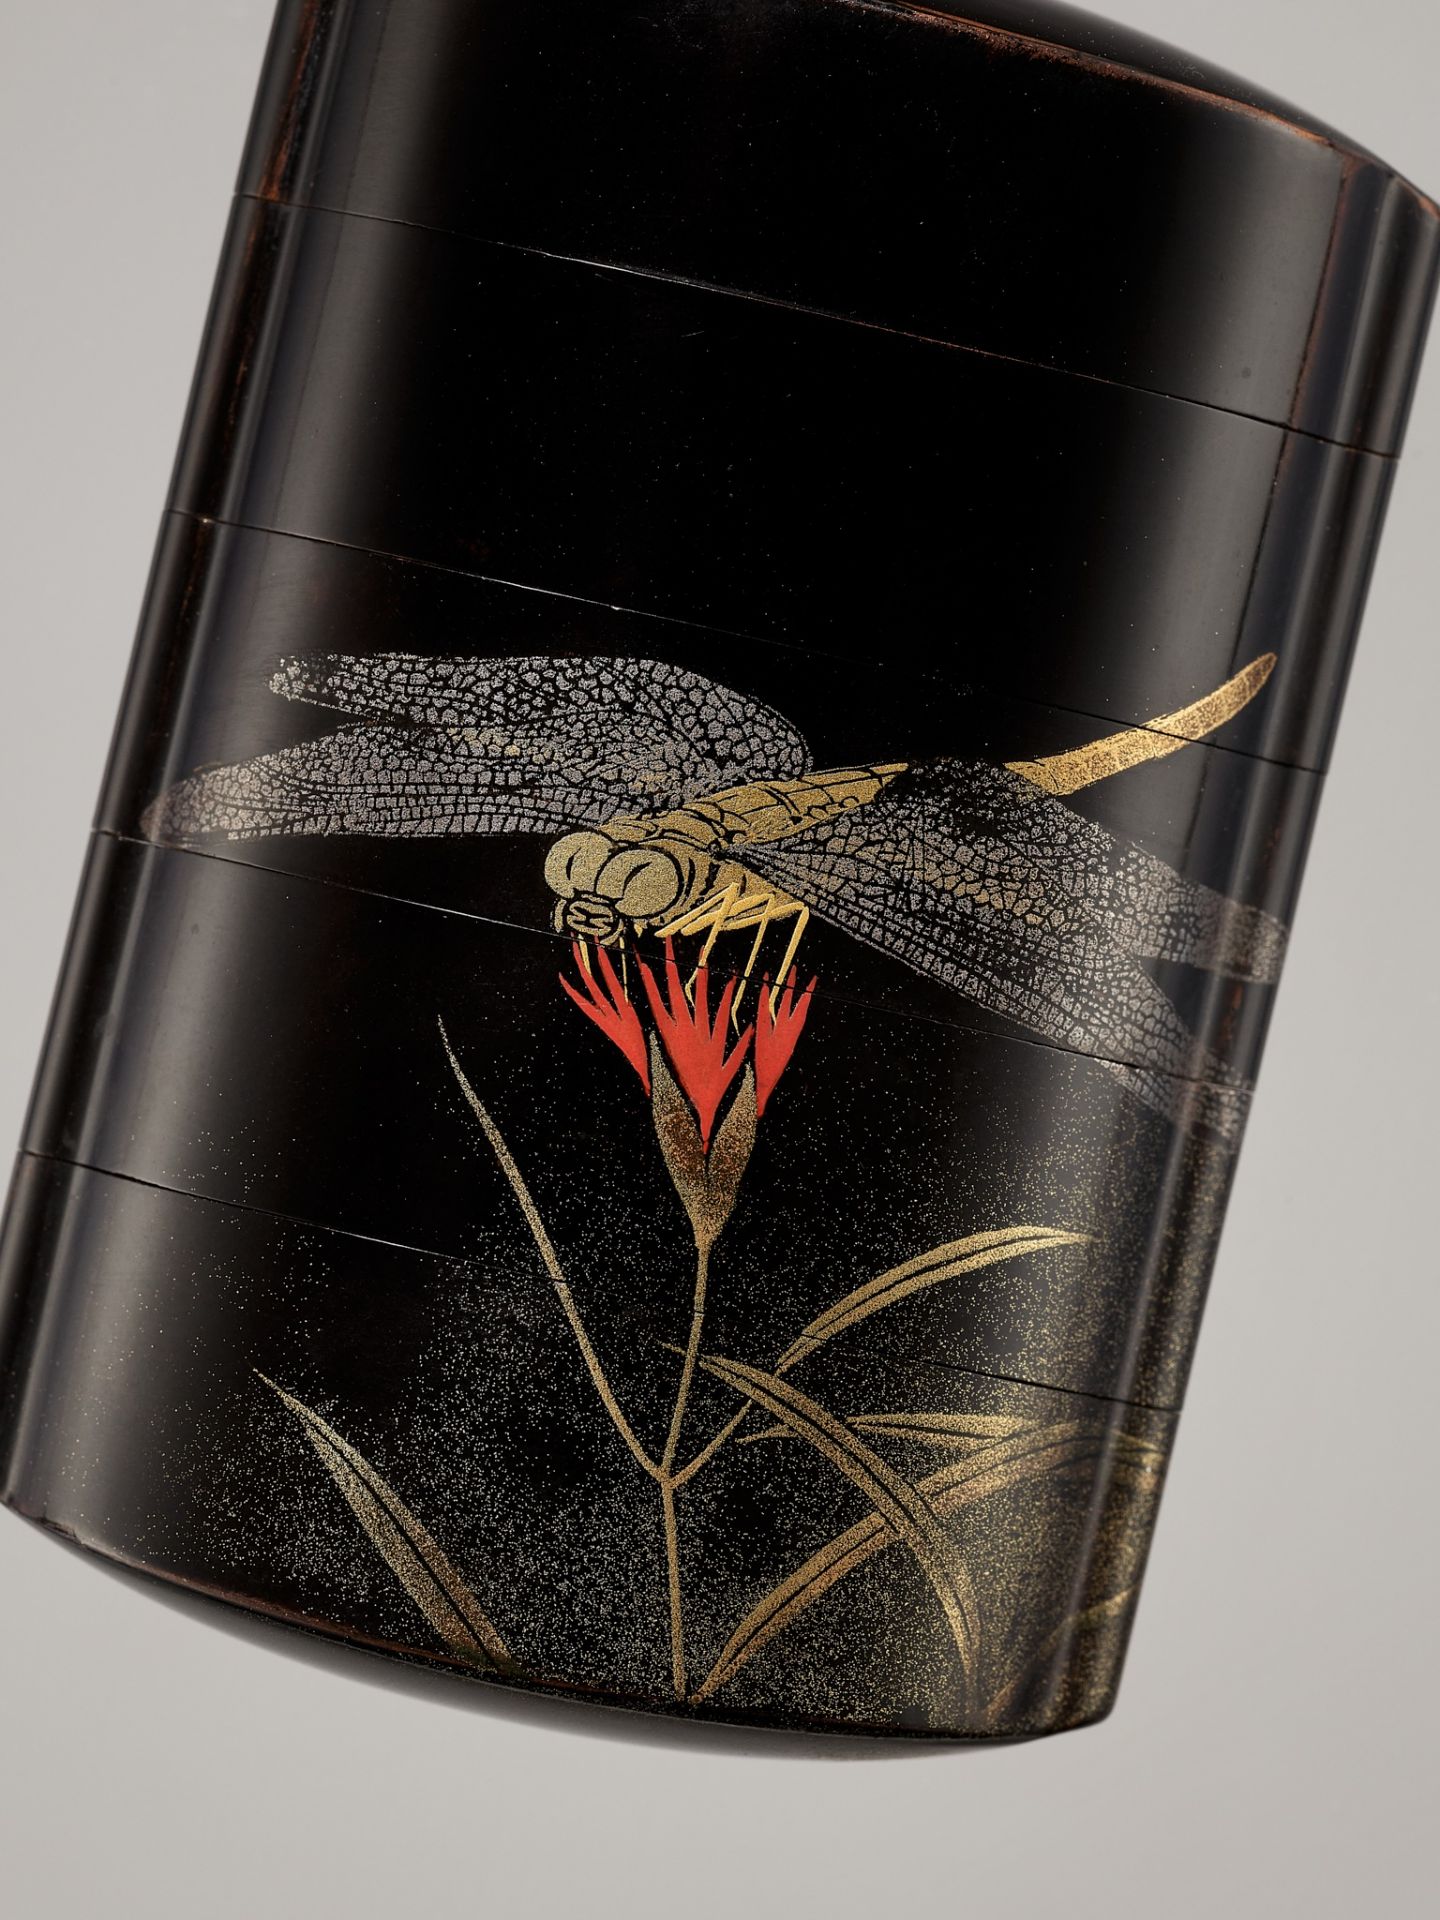 MOEI: A SUPERB FOUR-CASE TOGIDASHI LACQUER INRO DEPICTING A DRAGONFLY - Image 5 of 7